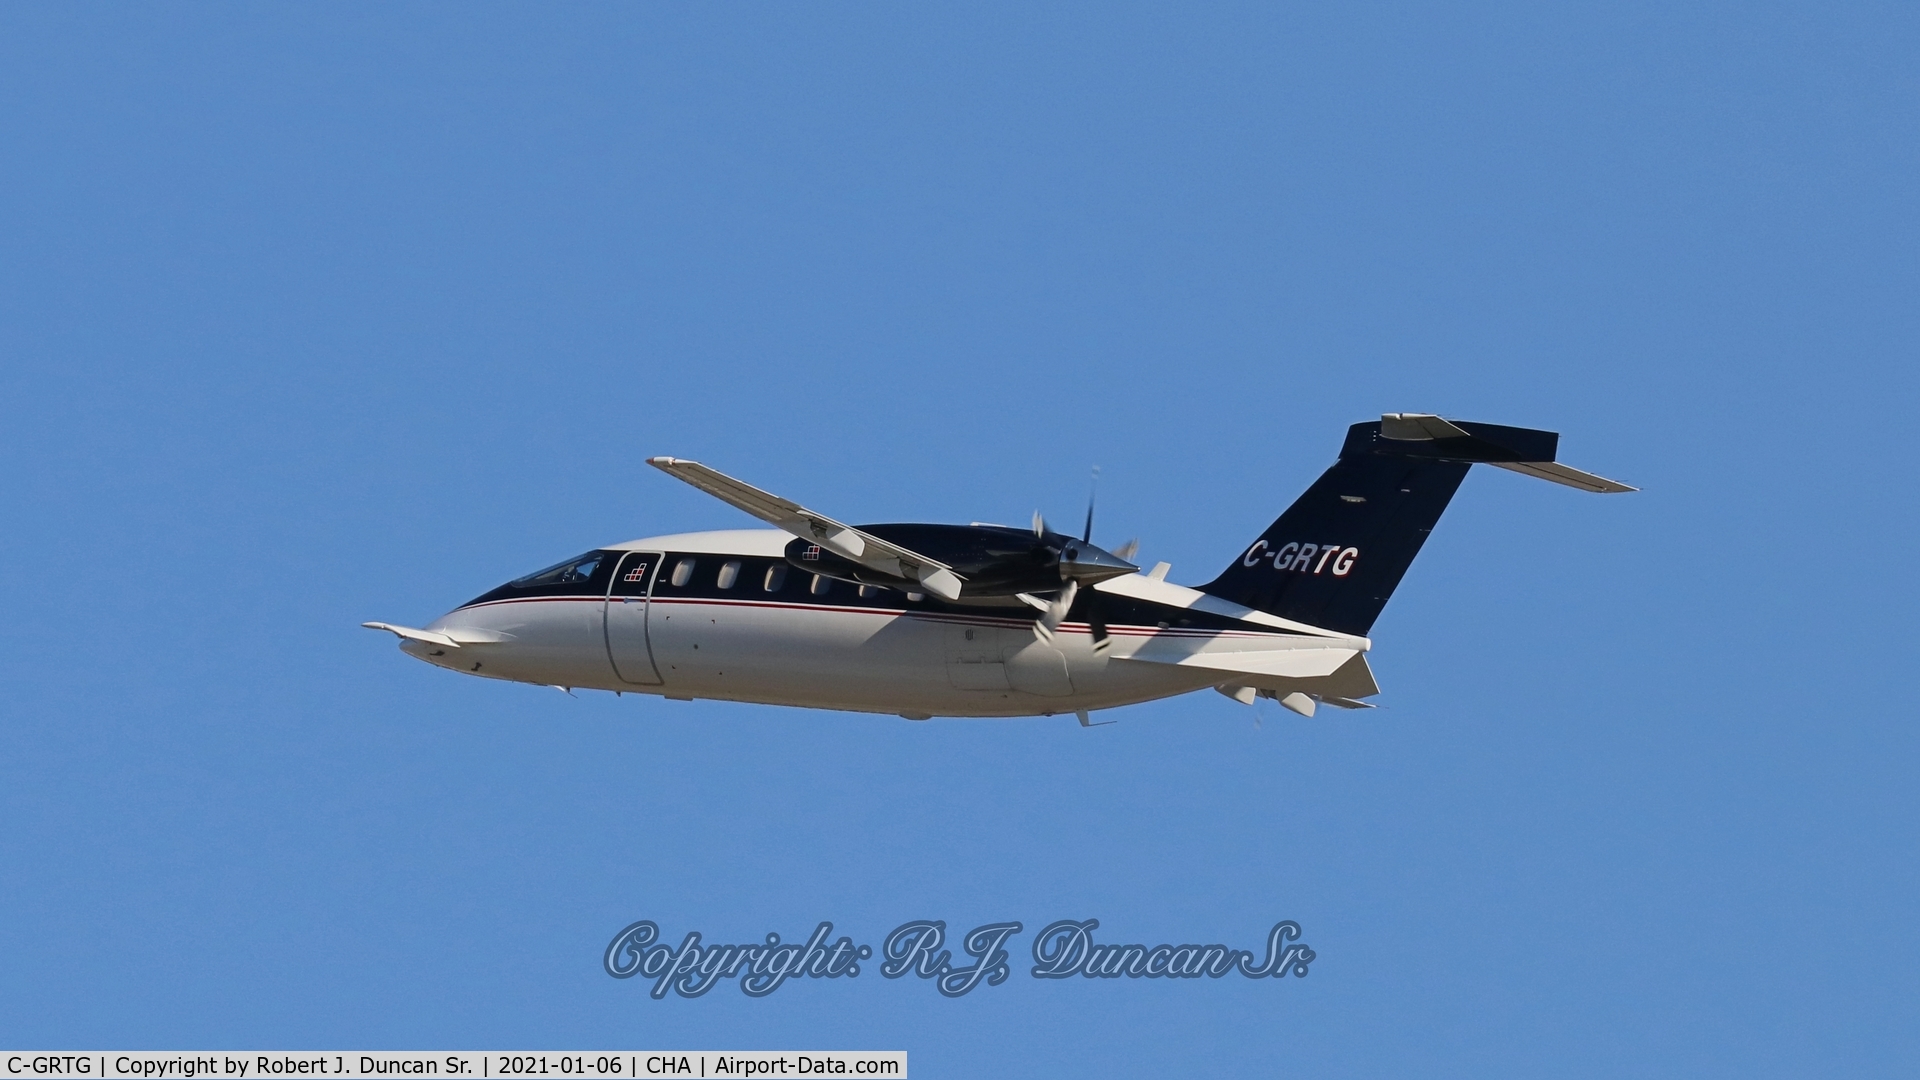 C-GRTG, 2008 Piaggio P-180 Avanti II C/N 1172, Piaggio P-180 taking off from Chattanooga, Tennessee's Lovell Field on 6 January, 2021.